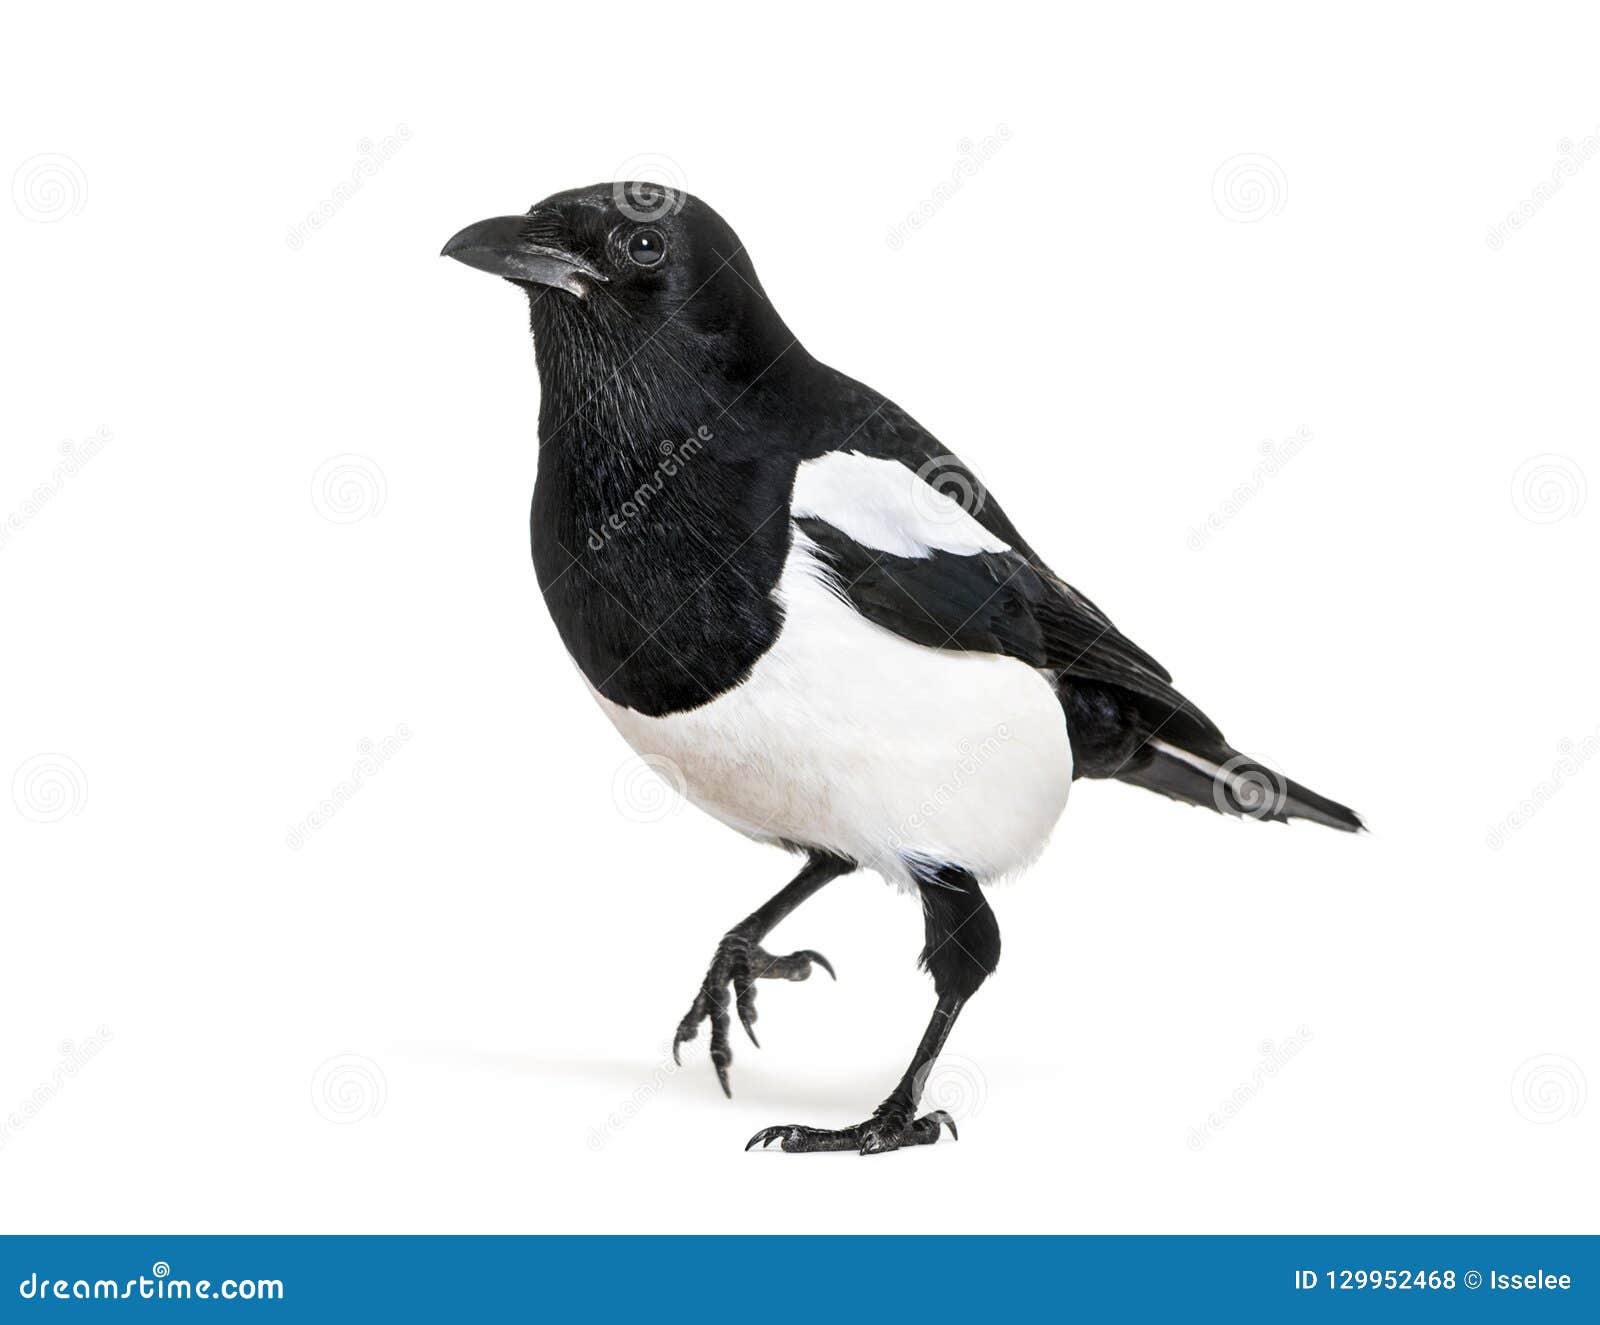 common magpie, pica pica, in front of white background